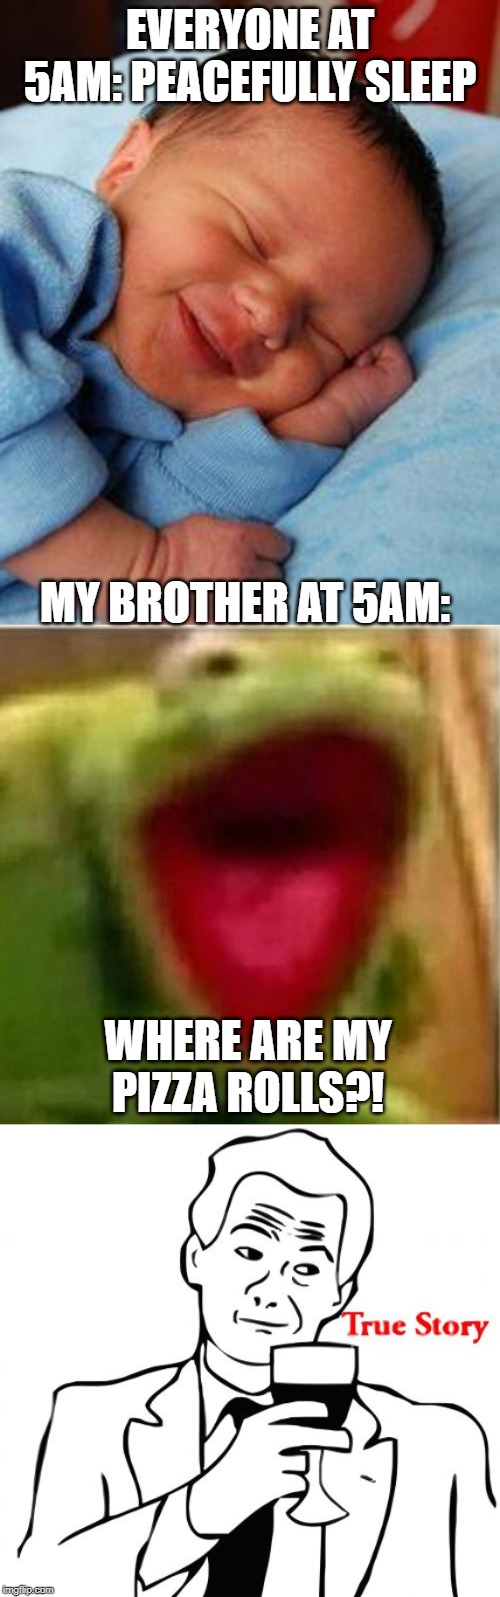 EVERYONE AT 5AM: PEACEFULLY SLEEP; MY BROTHER AT 5AM:; WHERE ARE MY PIZZA ROLLS?! | image tagged in memes,true story,sleeping baby laughing,ahhhhhhhhhhhhh | made w/ Imgflip meme maker